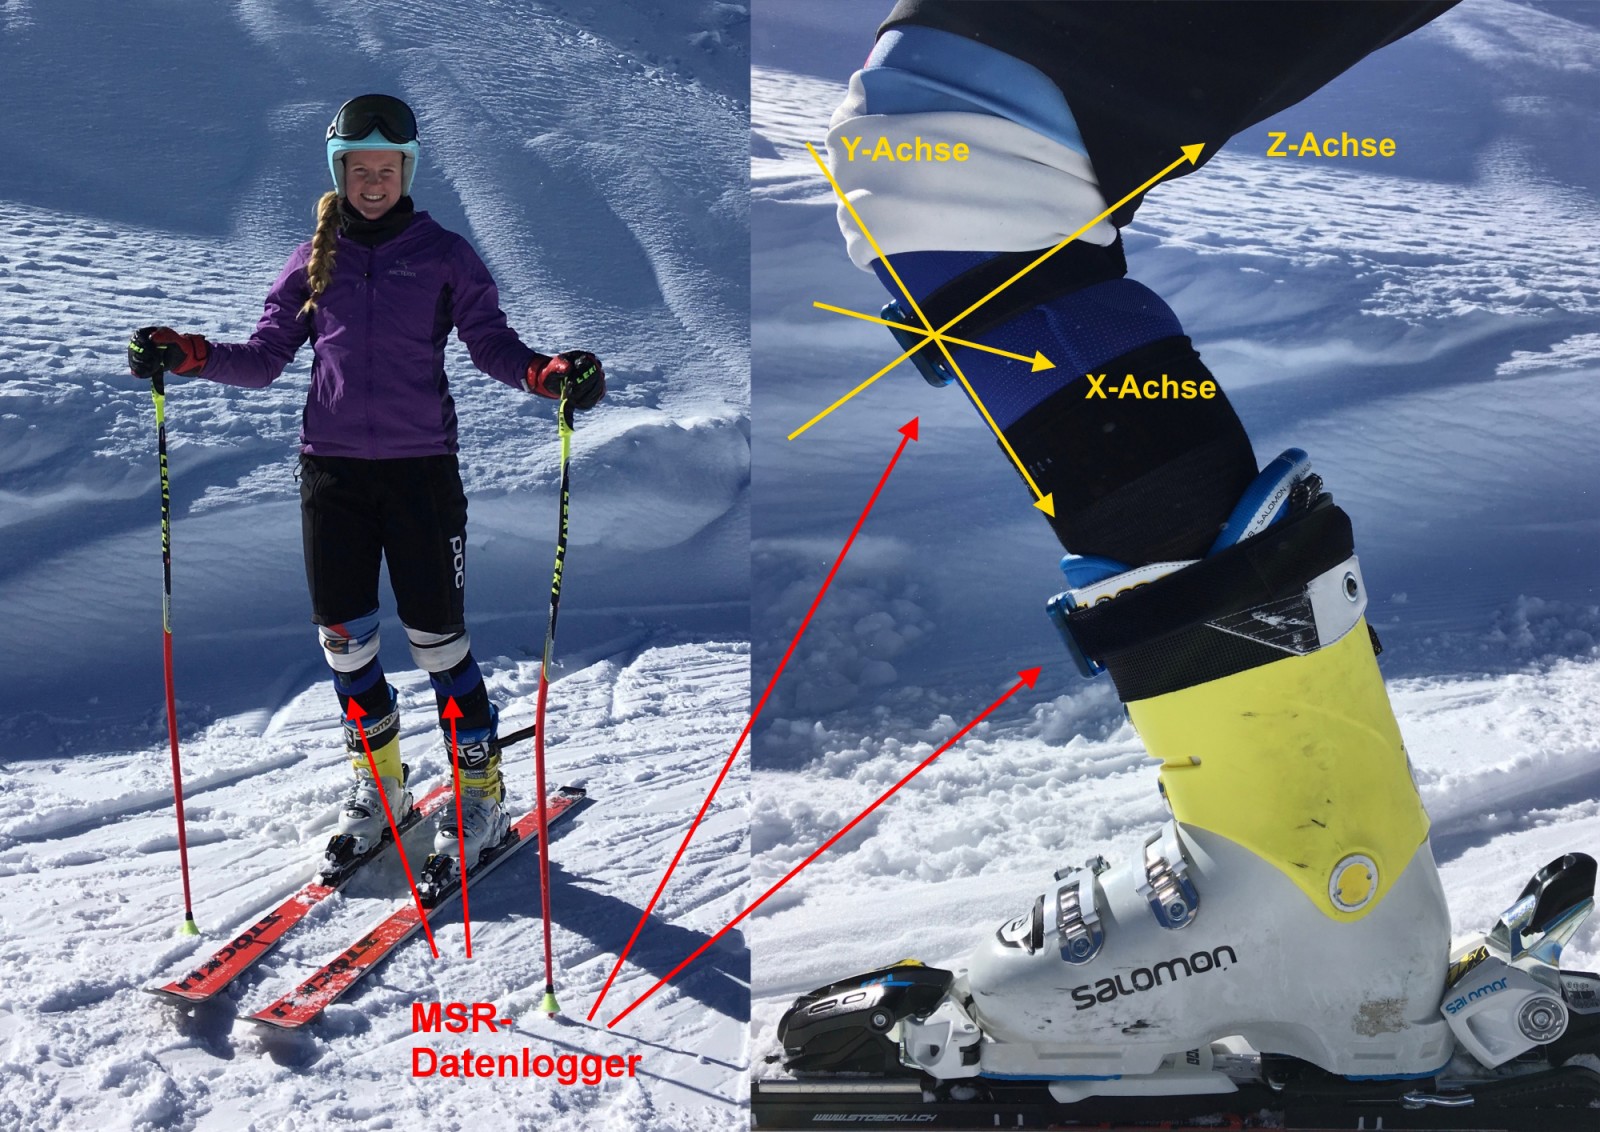 Left: Position of the data loggers on the skier's knee, on both sides. Right: Detailed view of the position of the MSR data loggers. Source: Thea Waldleben